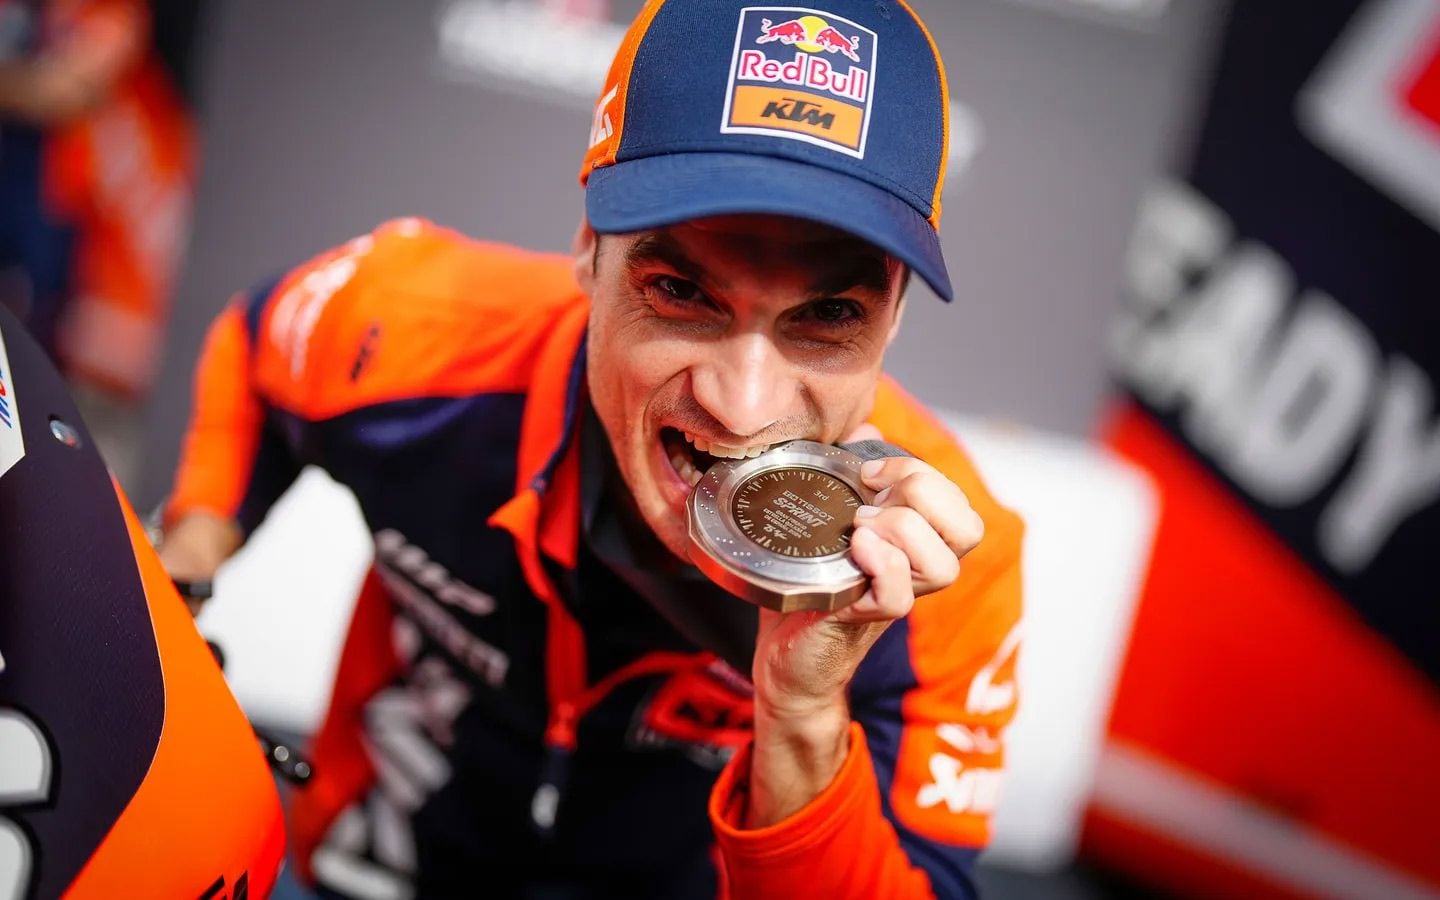 Dani Pedrosa ended up with a sprint podium on Saturday but crashed out on Sunday.